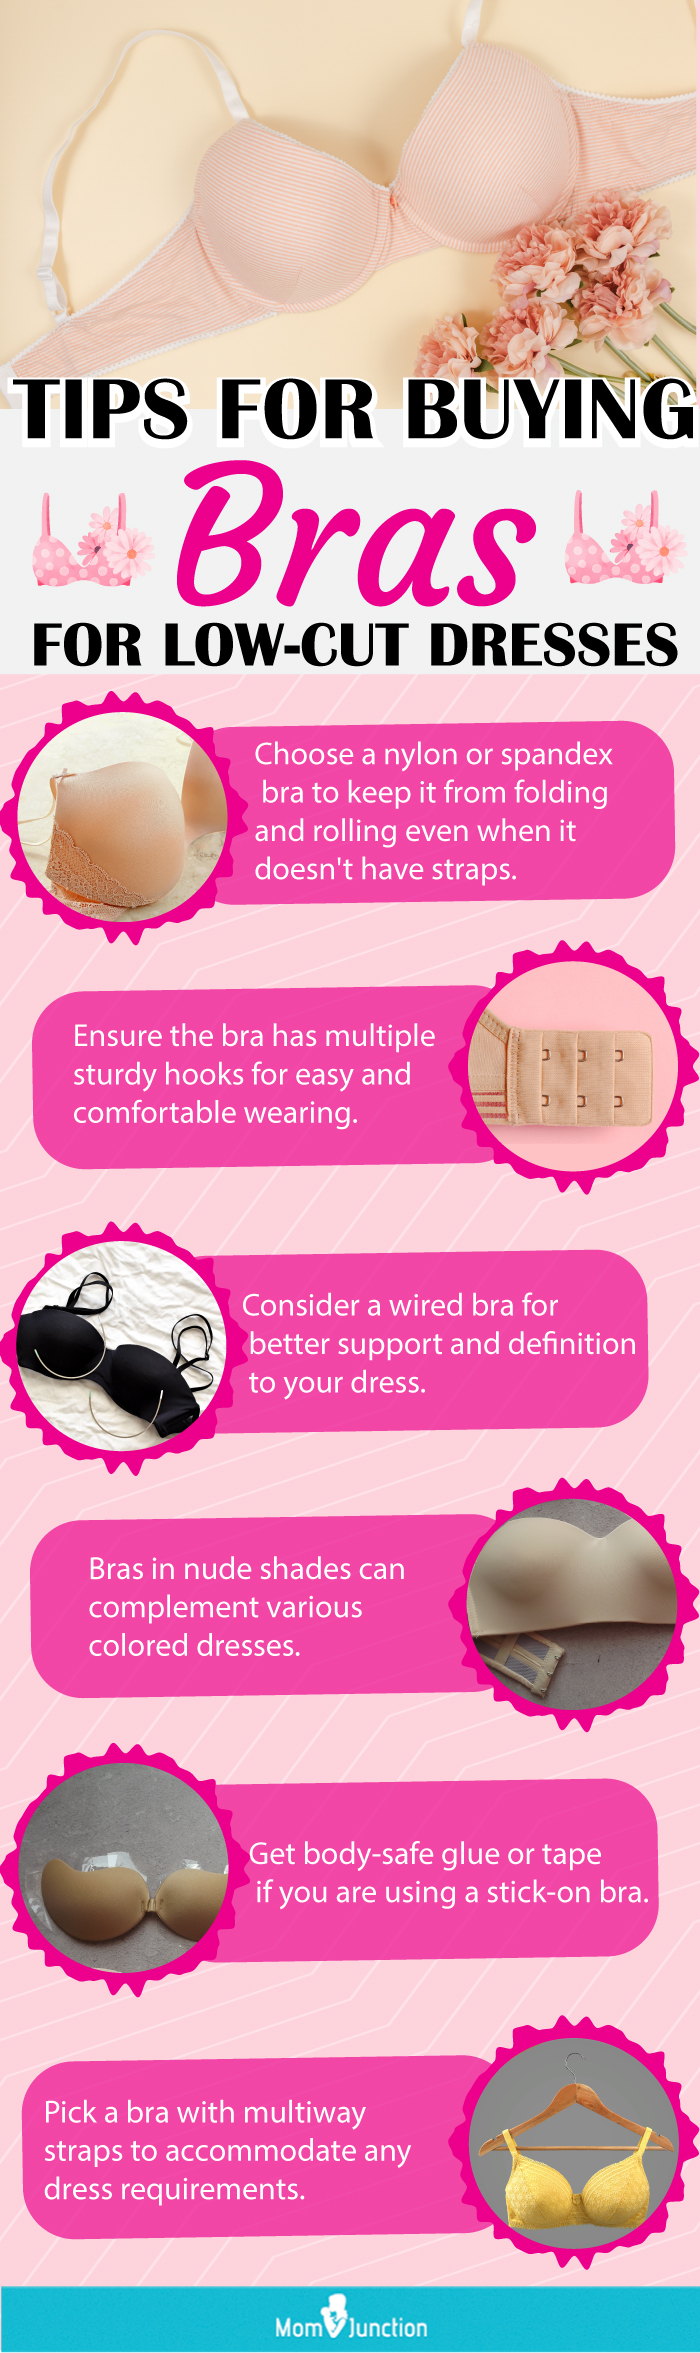 Tiny Secrets Breast Lift Tape, Boob Tape Self-Adhesive Bra Alternative,  Sweat-Proof, Breathable, Case Included, Light Nude, 1 roll